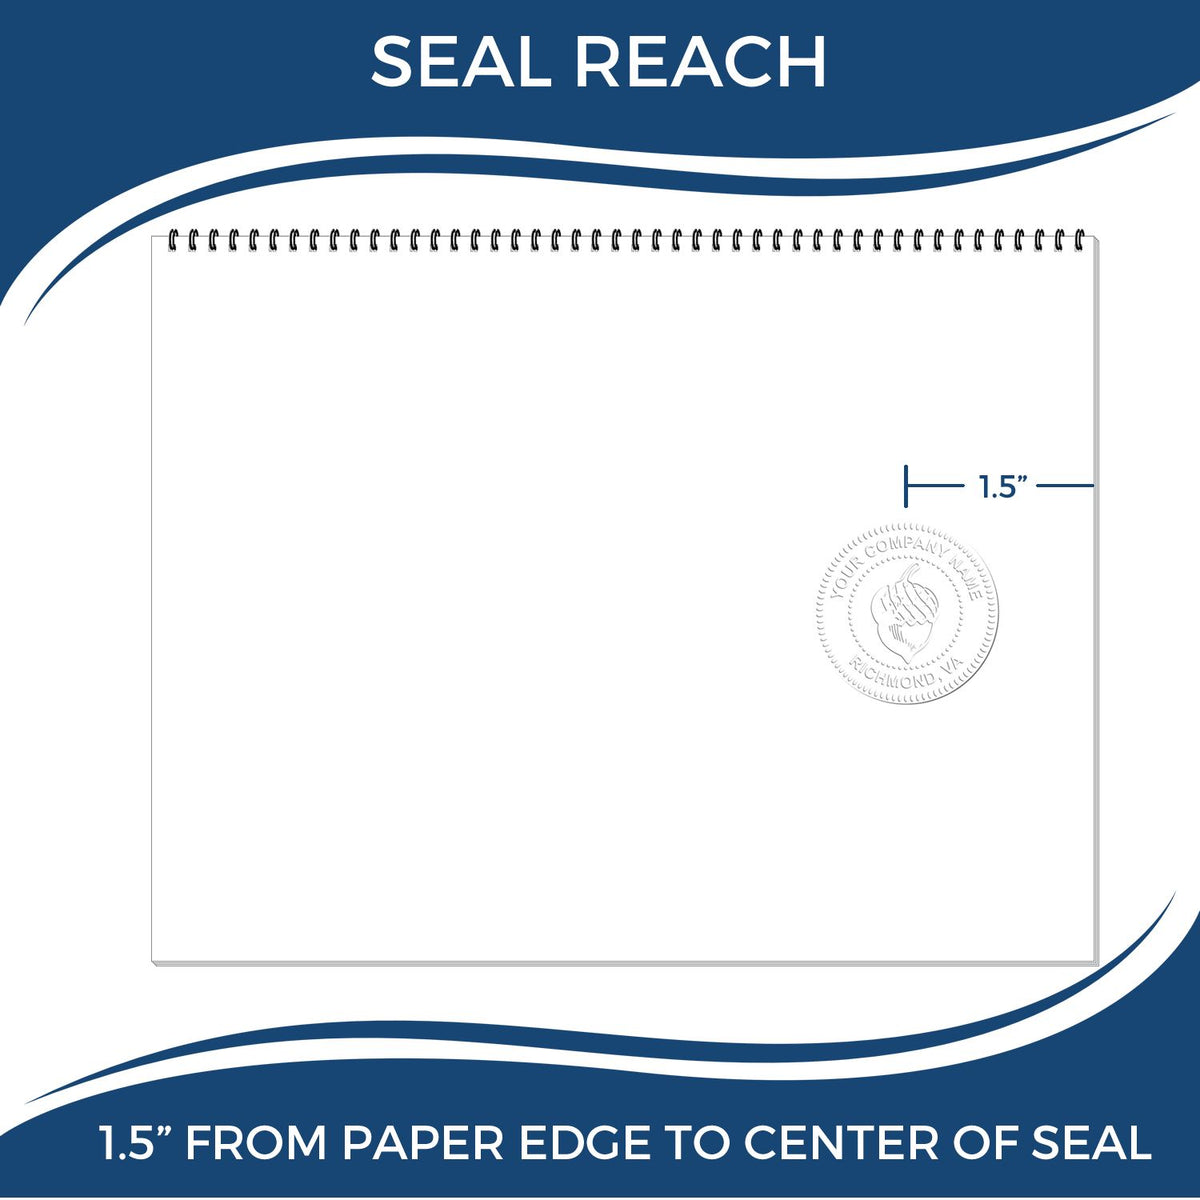 An infographic showing the seal reach which is represented by a ruler and a miniature seal image of the Maine Desk Architect Embossing Seal